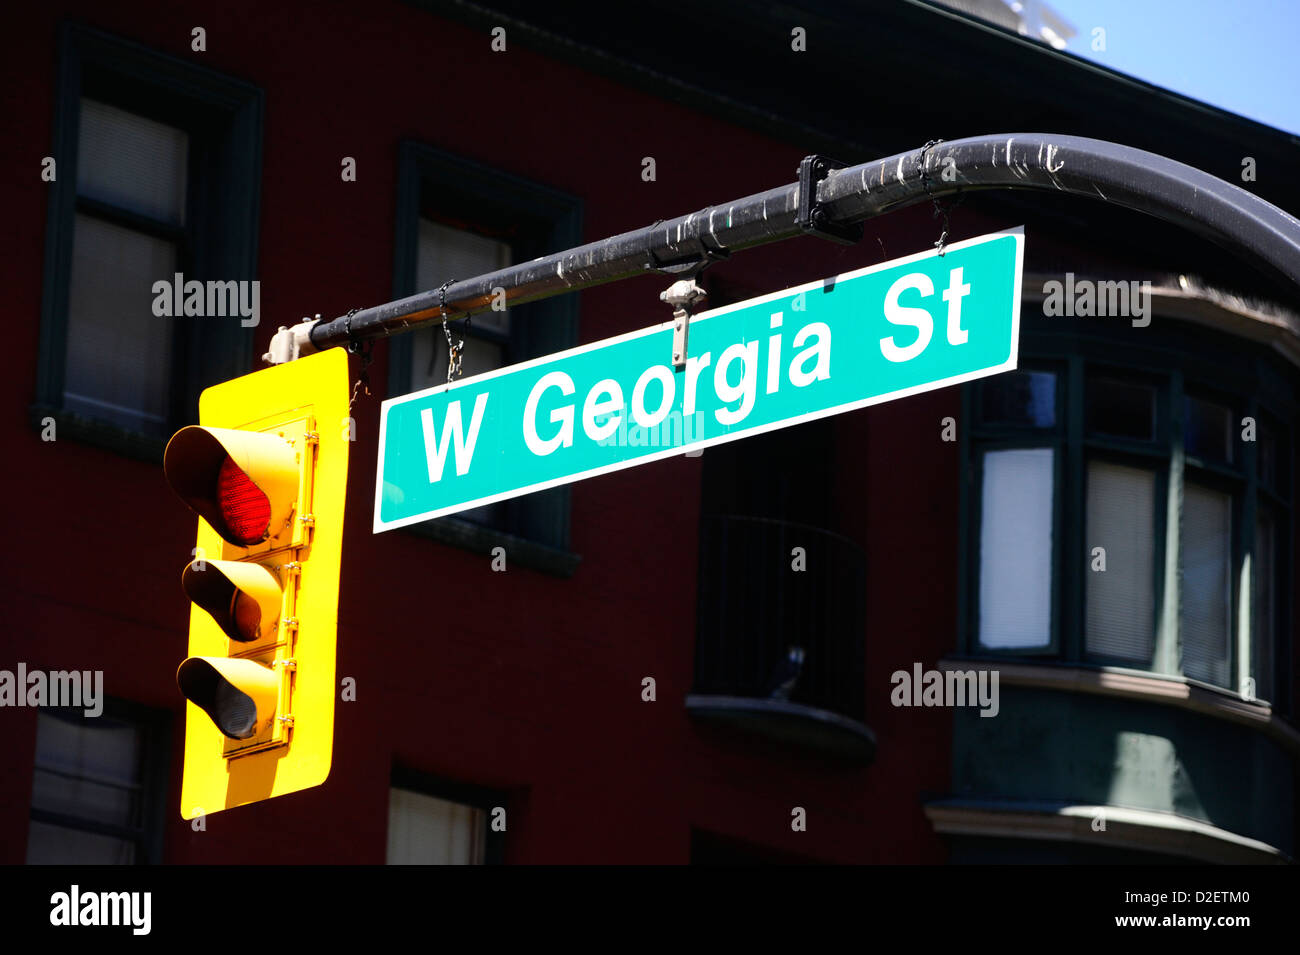 West Georgia St sign in Vancouver. Foto Stock